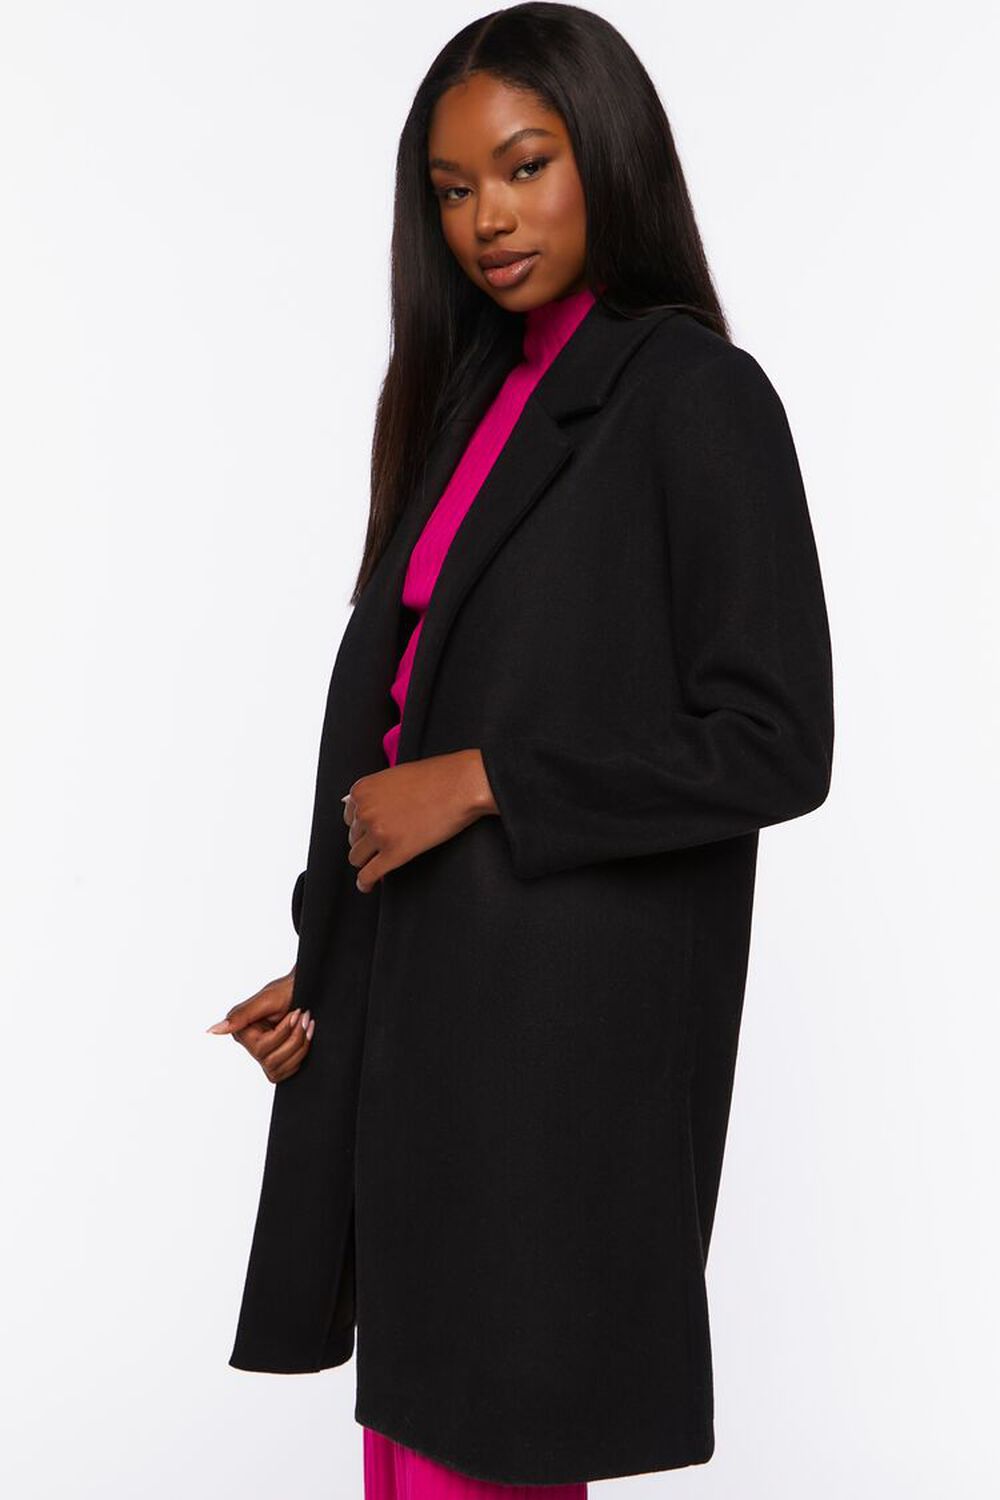 BLACK Notched Trench Coat, image 2